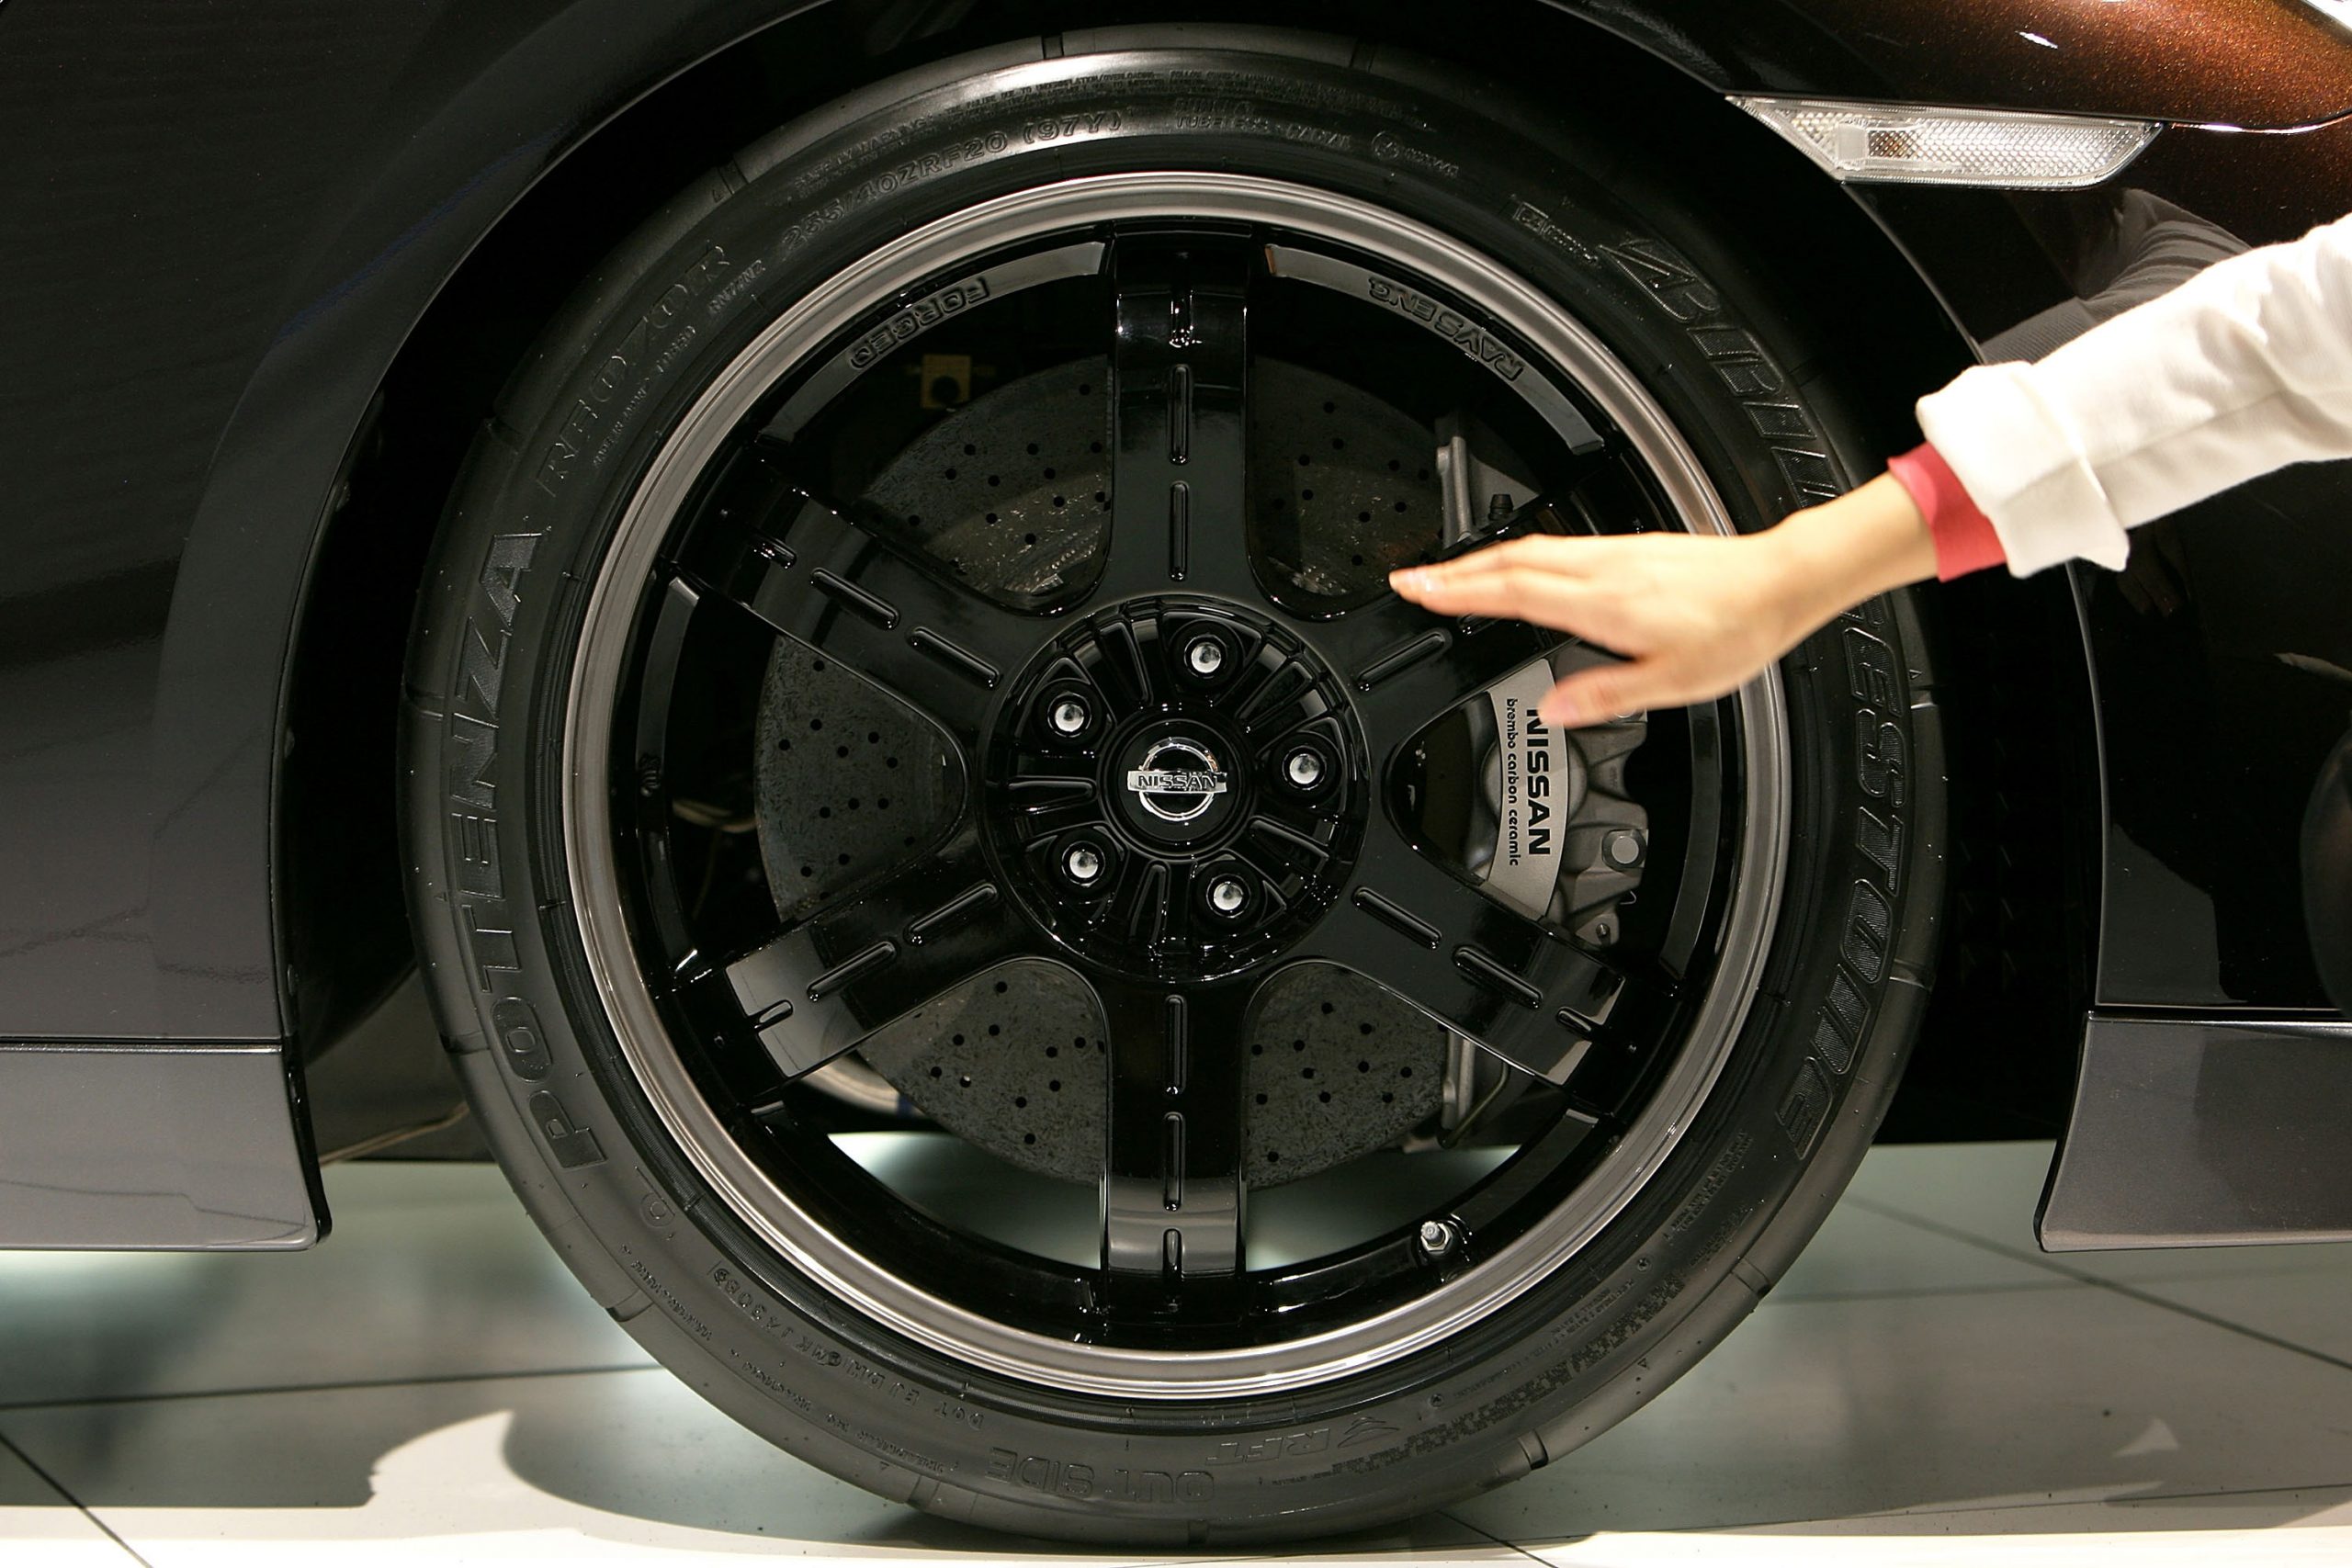 Brembo carbon ceramic brakes on a Nissan GT-R branded with the Nissan logo